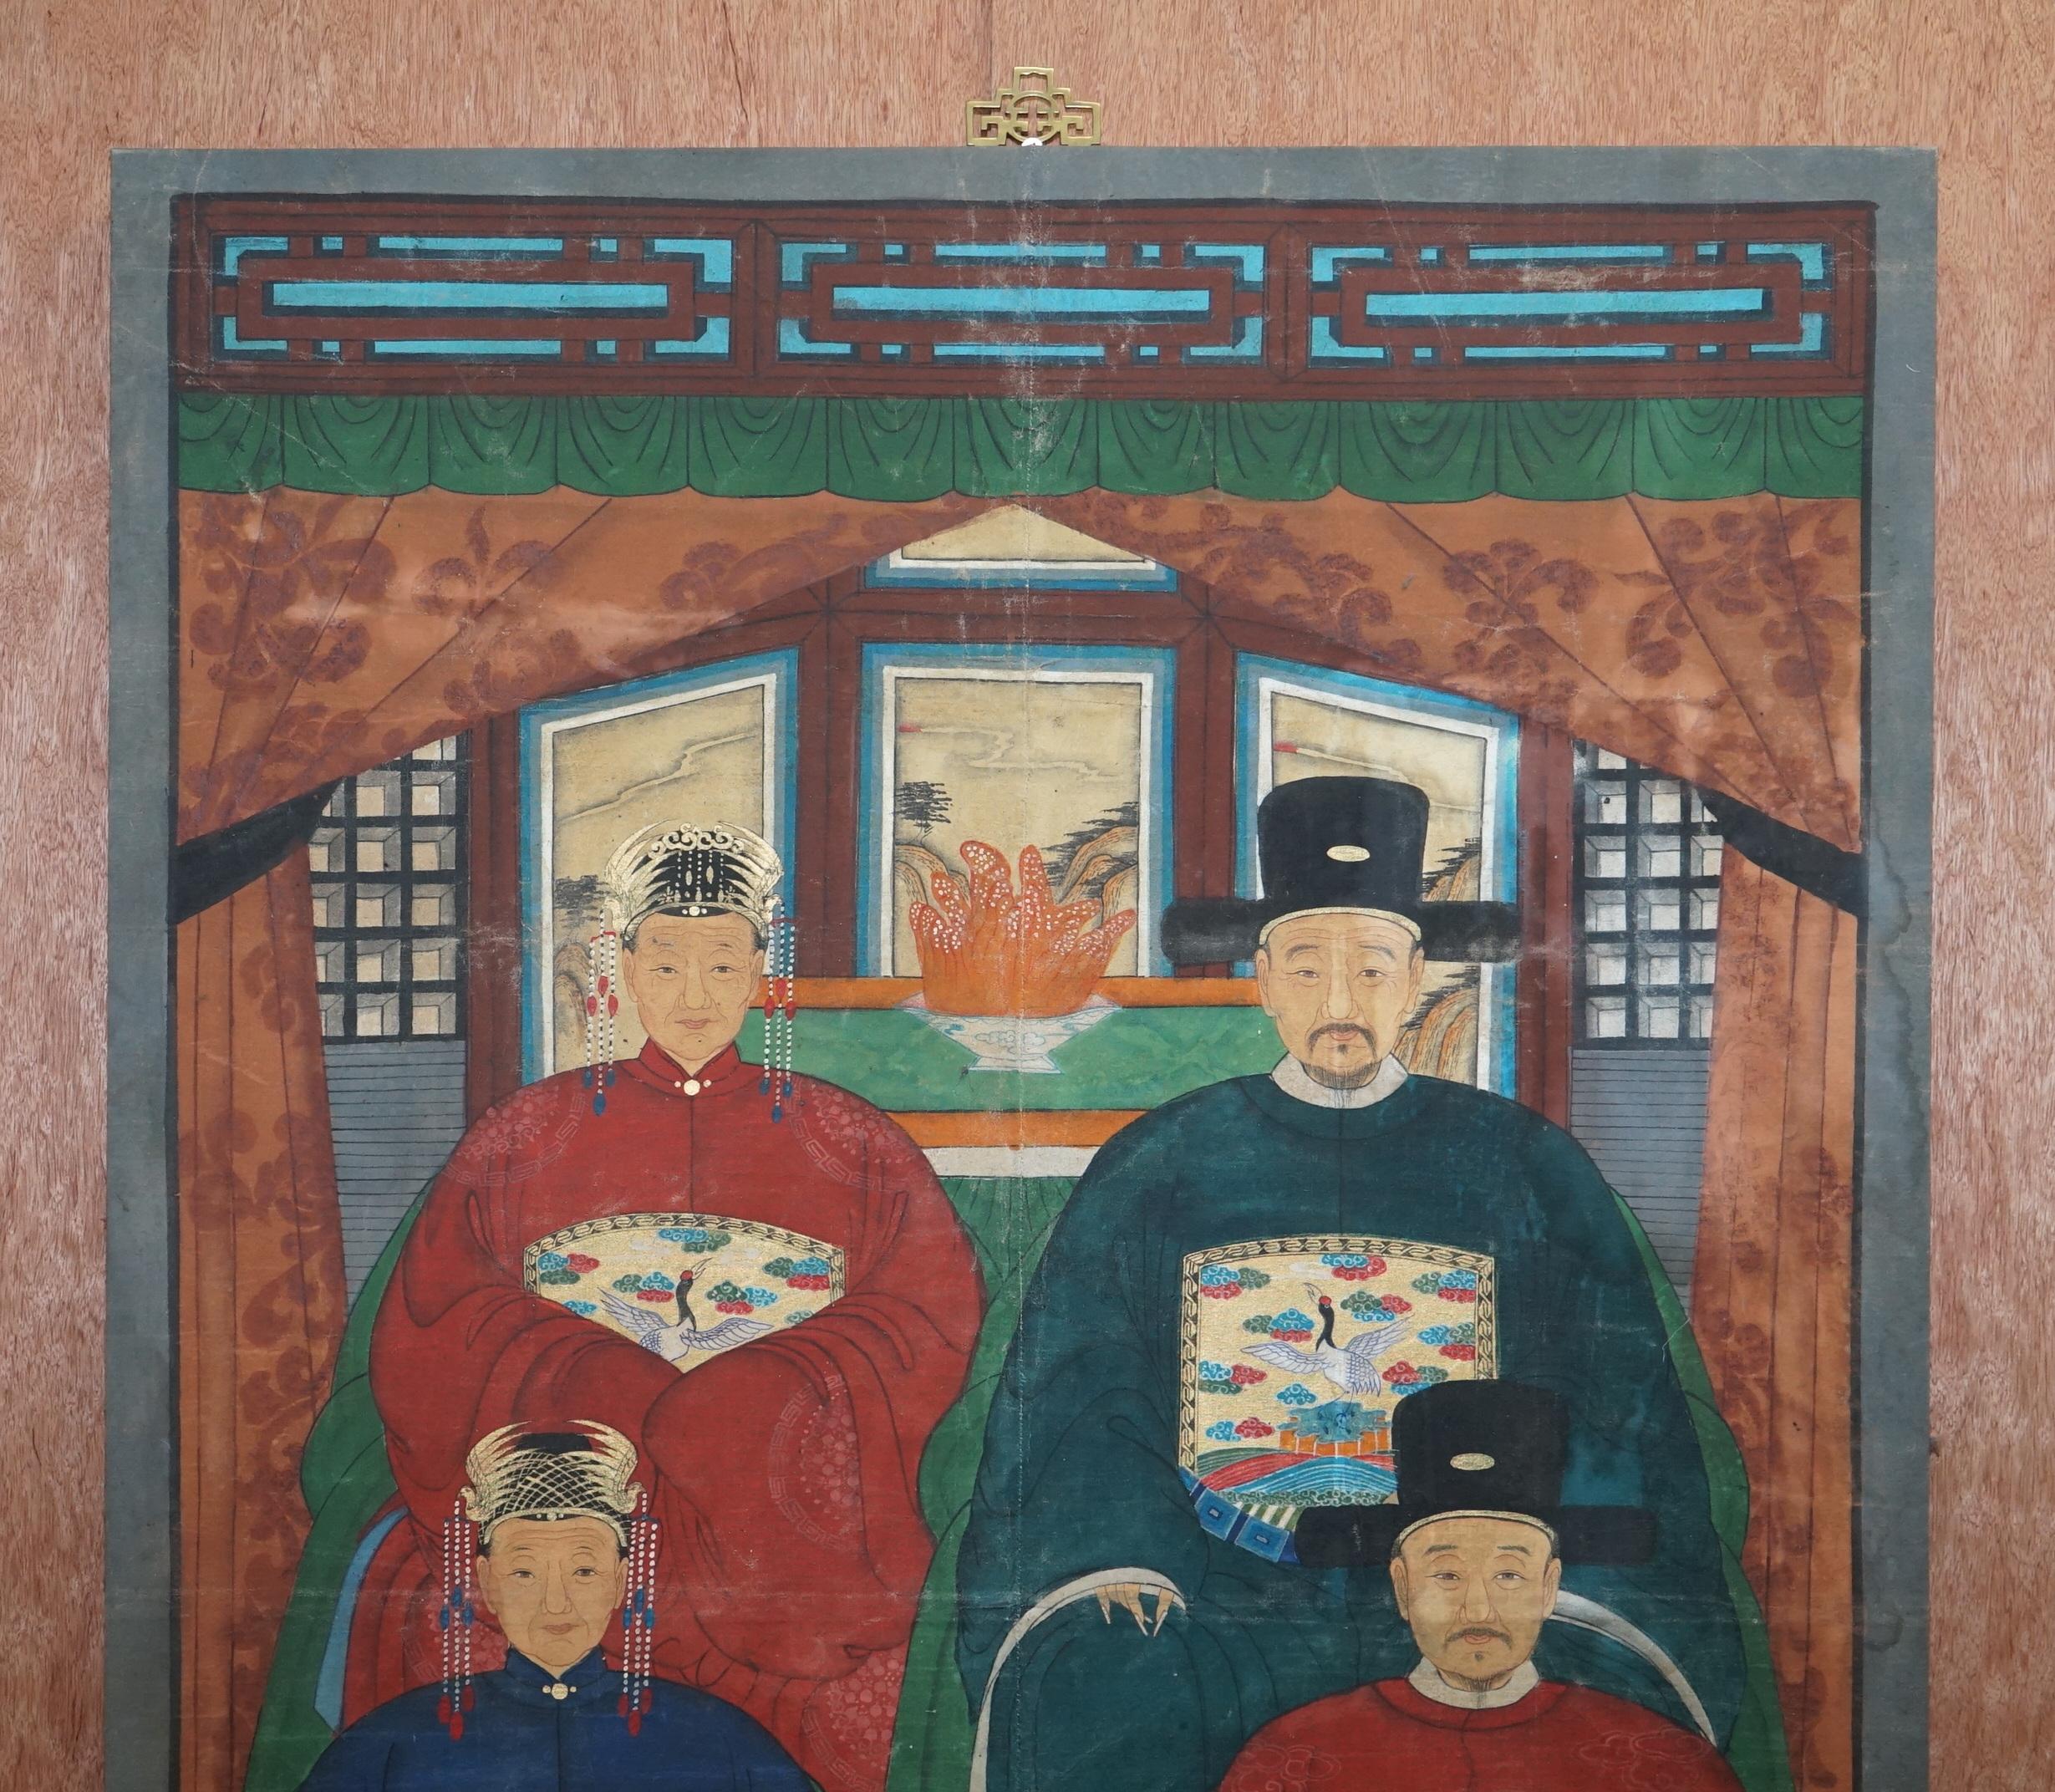 We are delighted to offer for sale this very rare Chinese ancestral oil on canvas family painting which is part of a suite

The is the large one, it depicts four very important looking family members in some kind of ceremonial dress robes. The